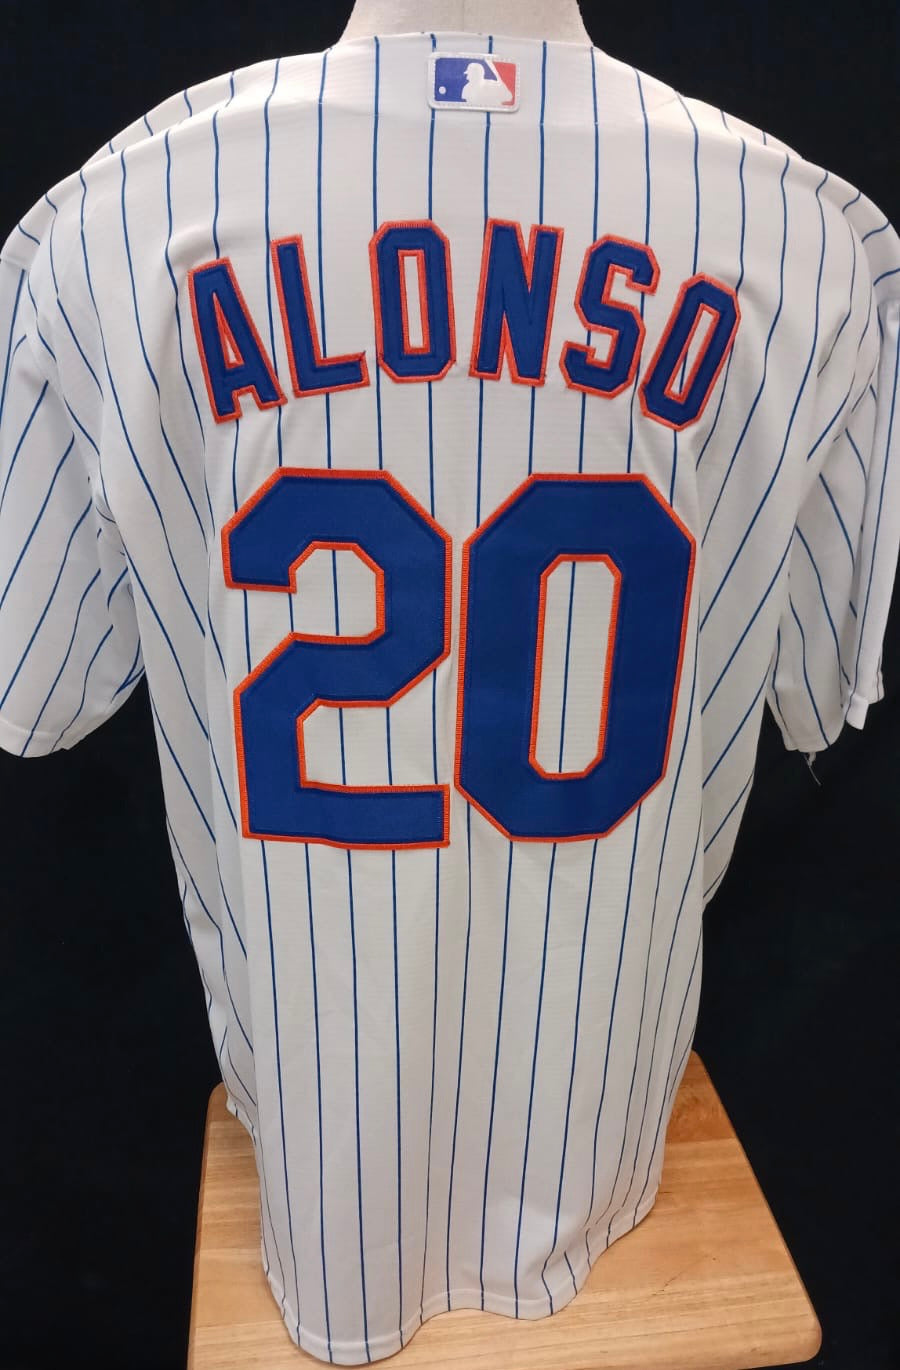  Outerstuff Pete Alonso #20 New York Mets Home White